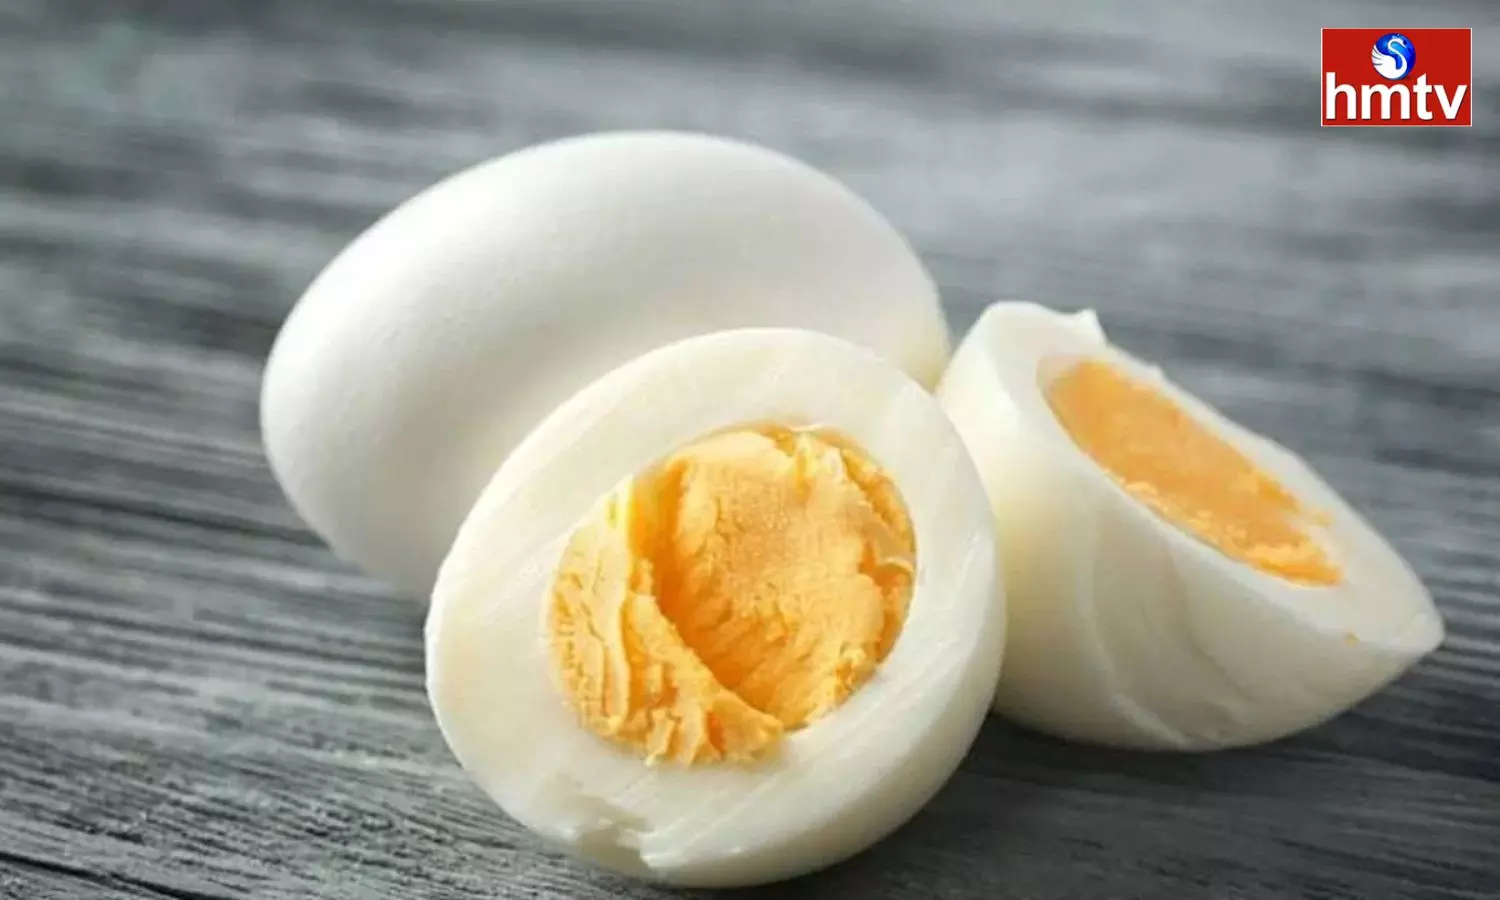 Eat 2 Eggs Daily Helps to Deal with Stressful Situations